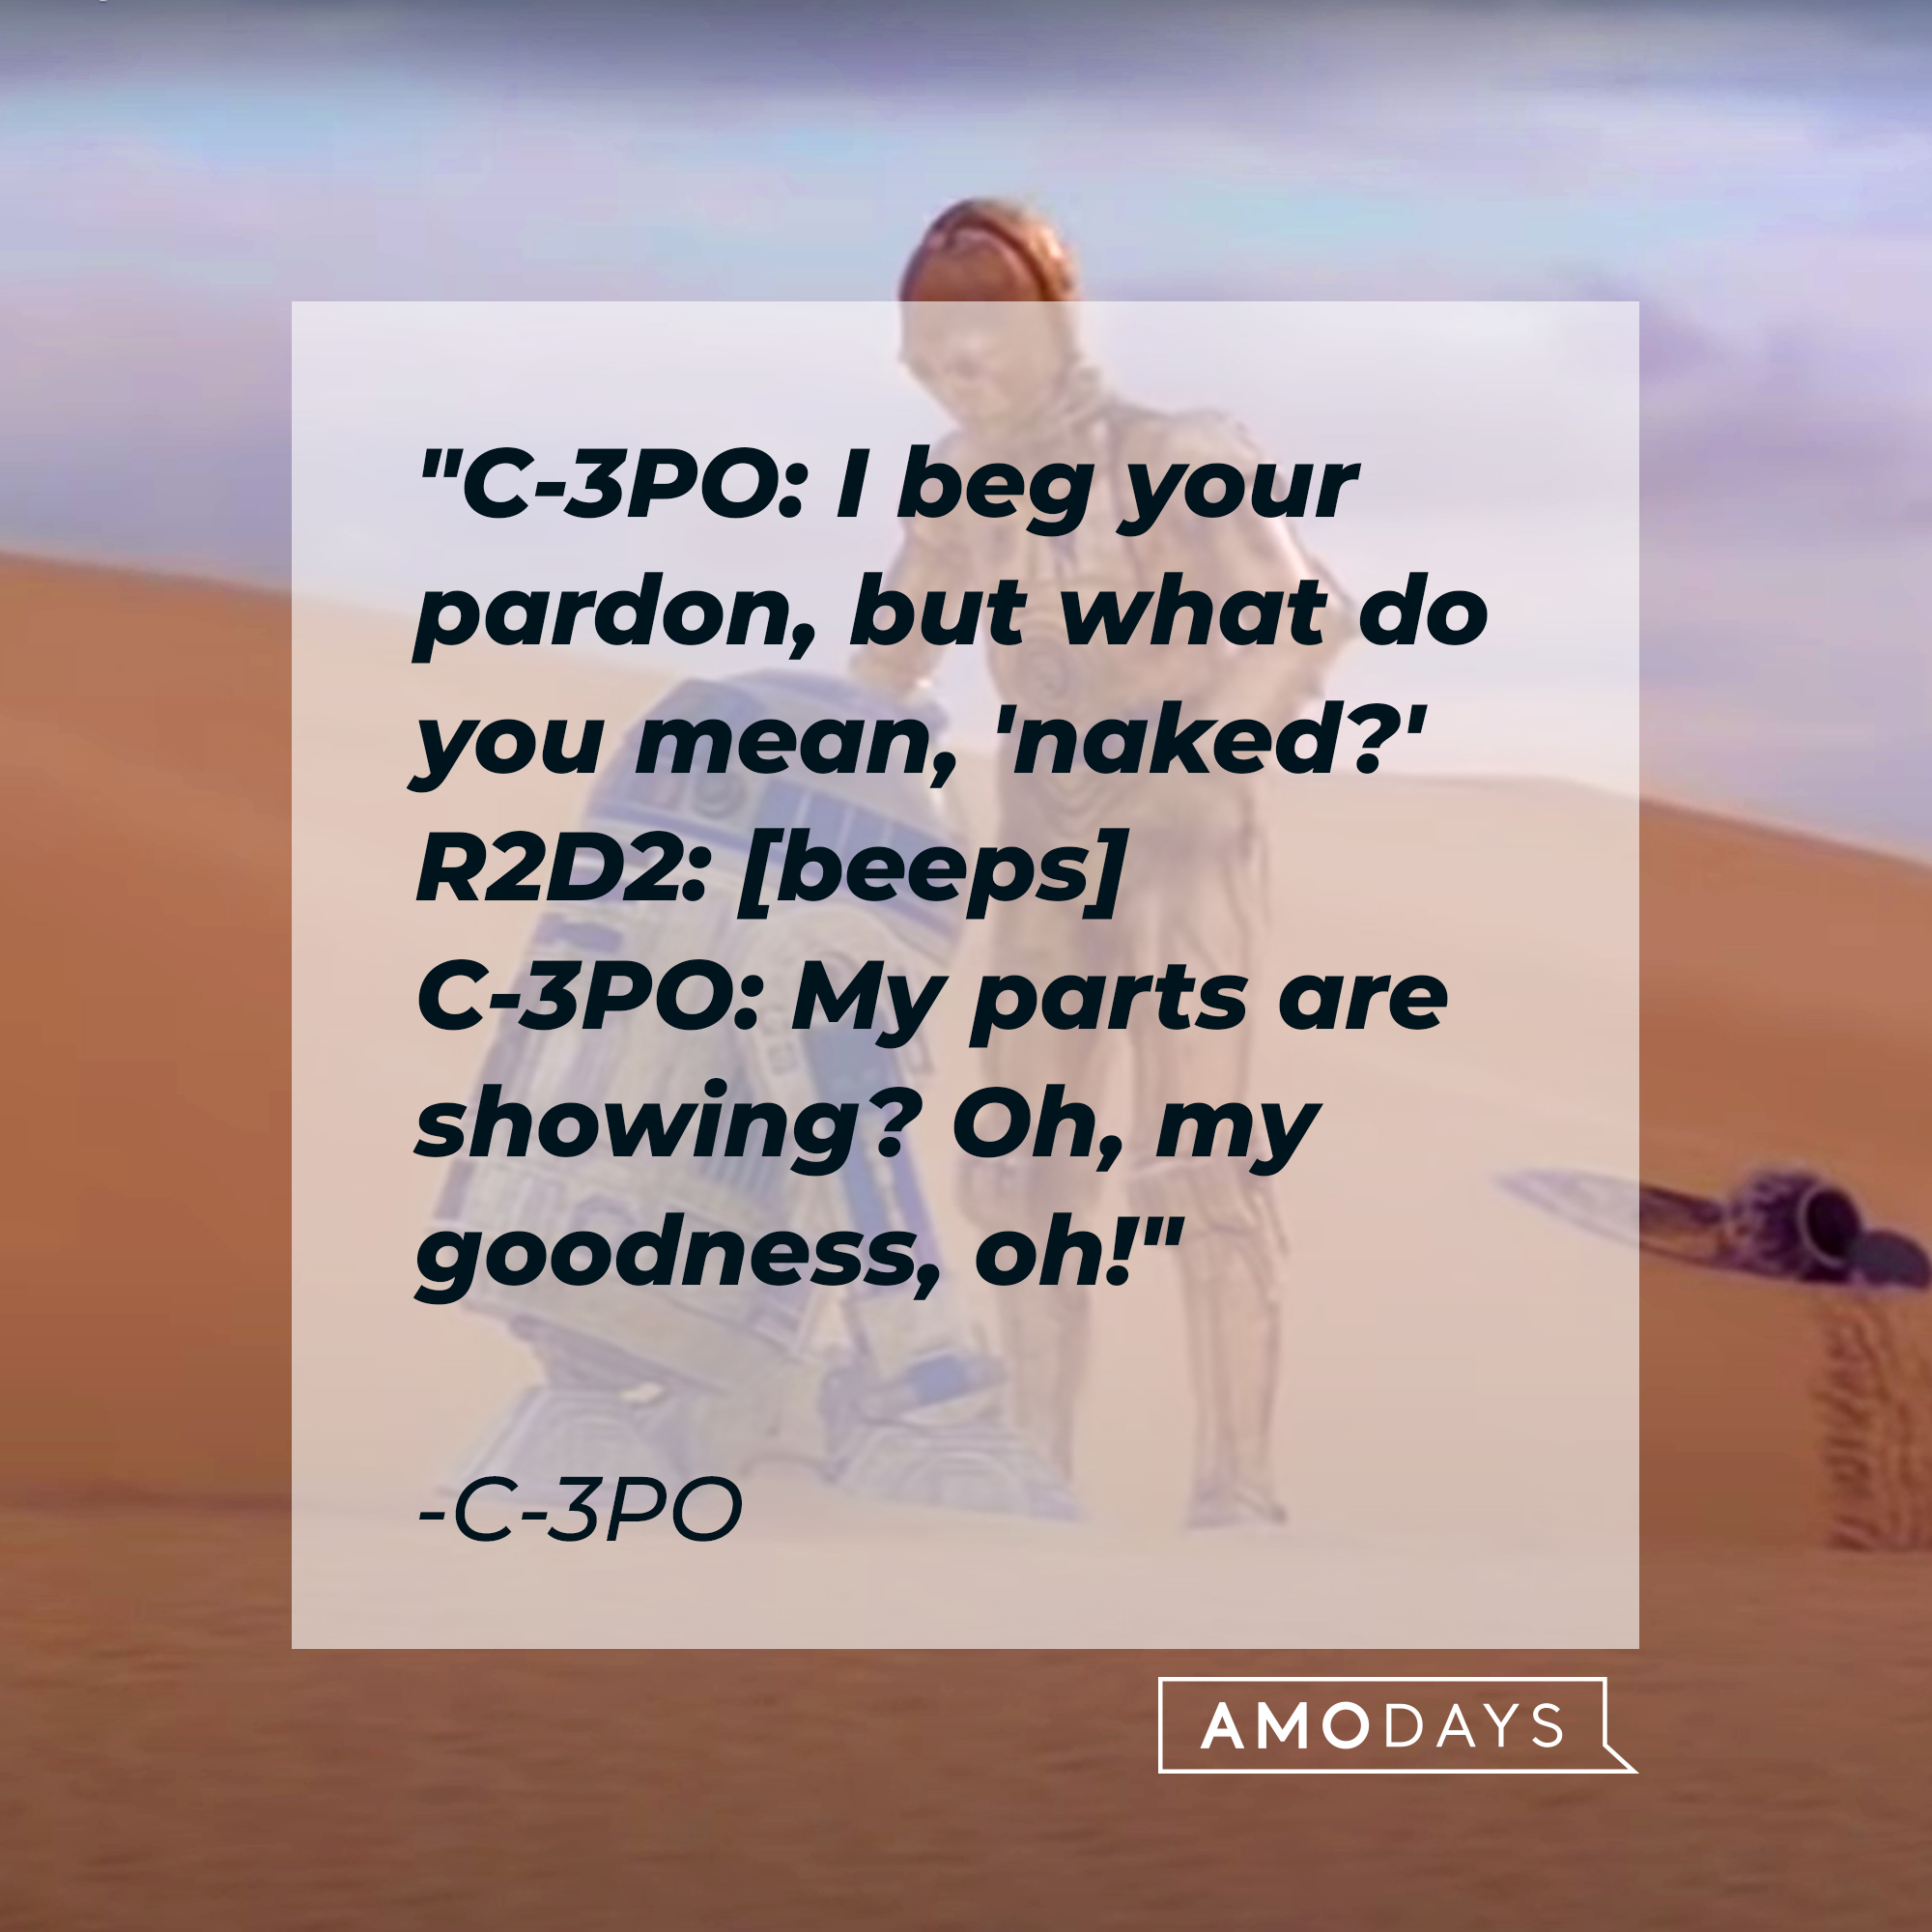 The "Star Wars" quote, "C-3PO: I beg your pardon, but what do you mean, 'naked?' R2D2: [beeps] C-3PO: My parts are showing? Oh, my goodness, oh!" | Source: Facebook/StarWars